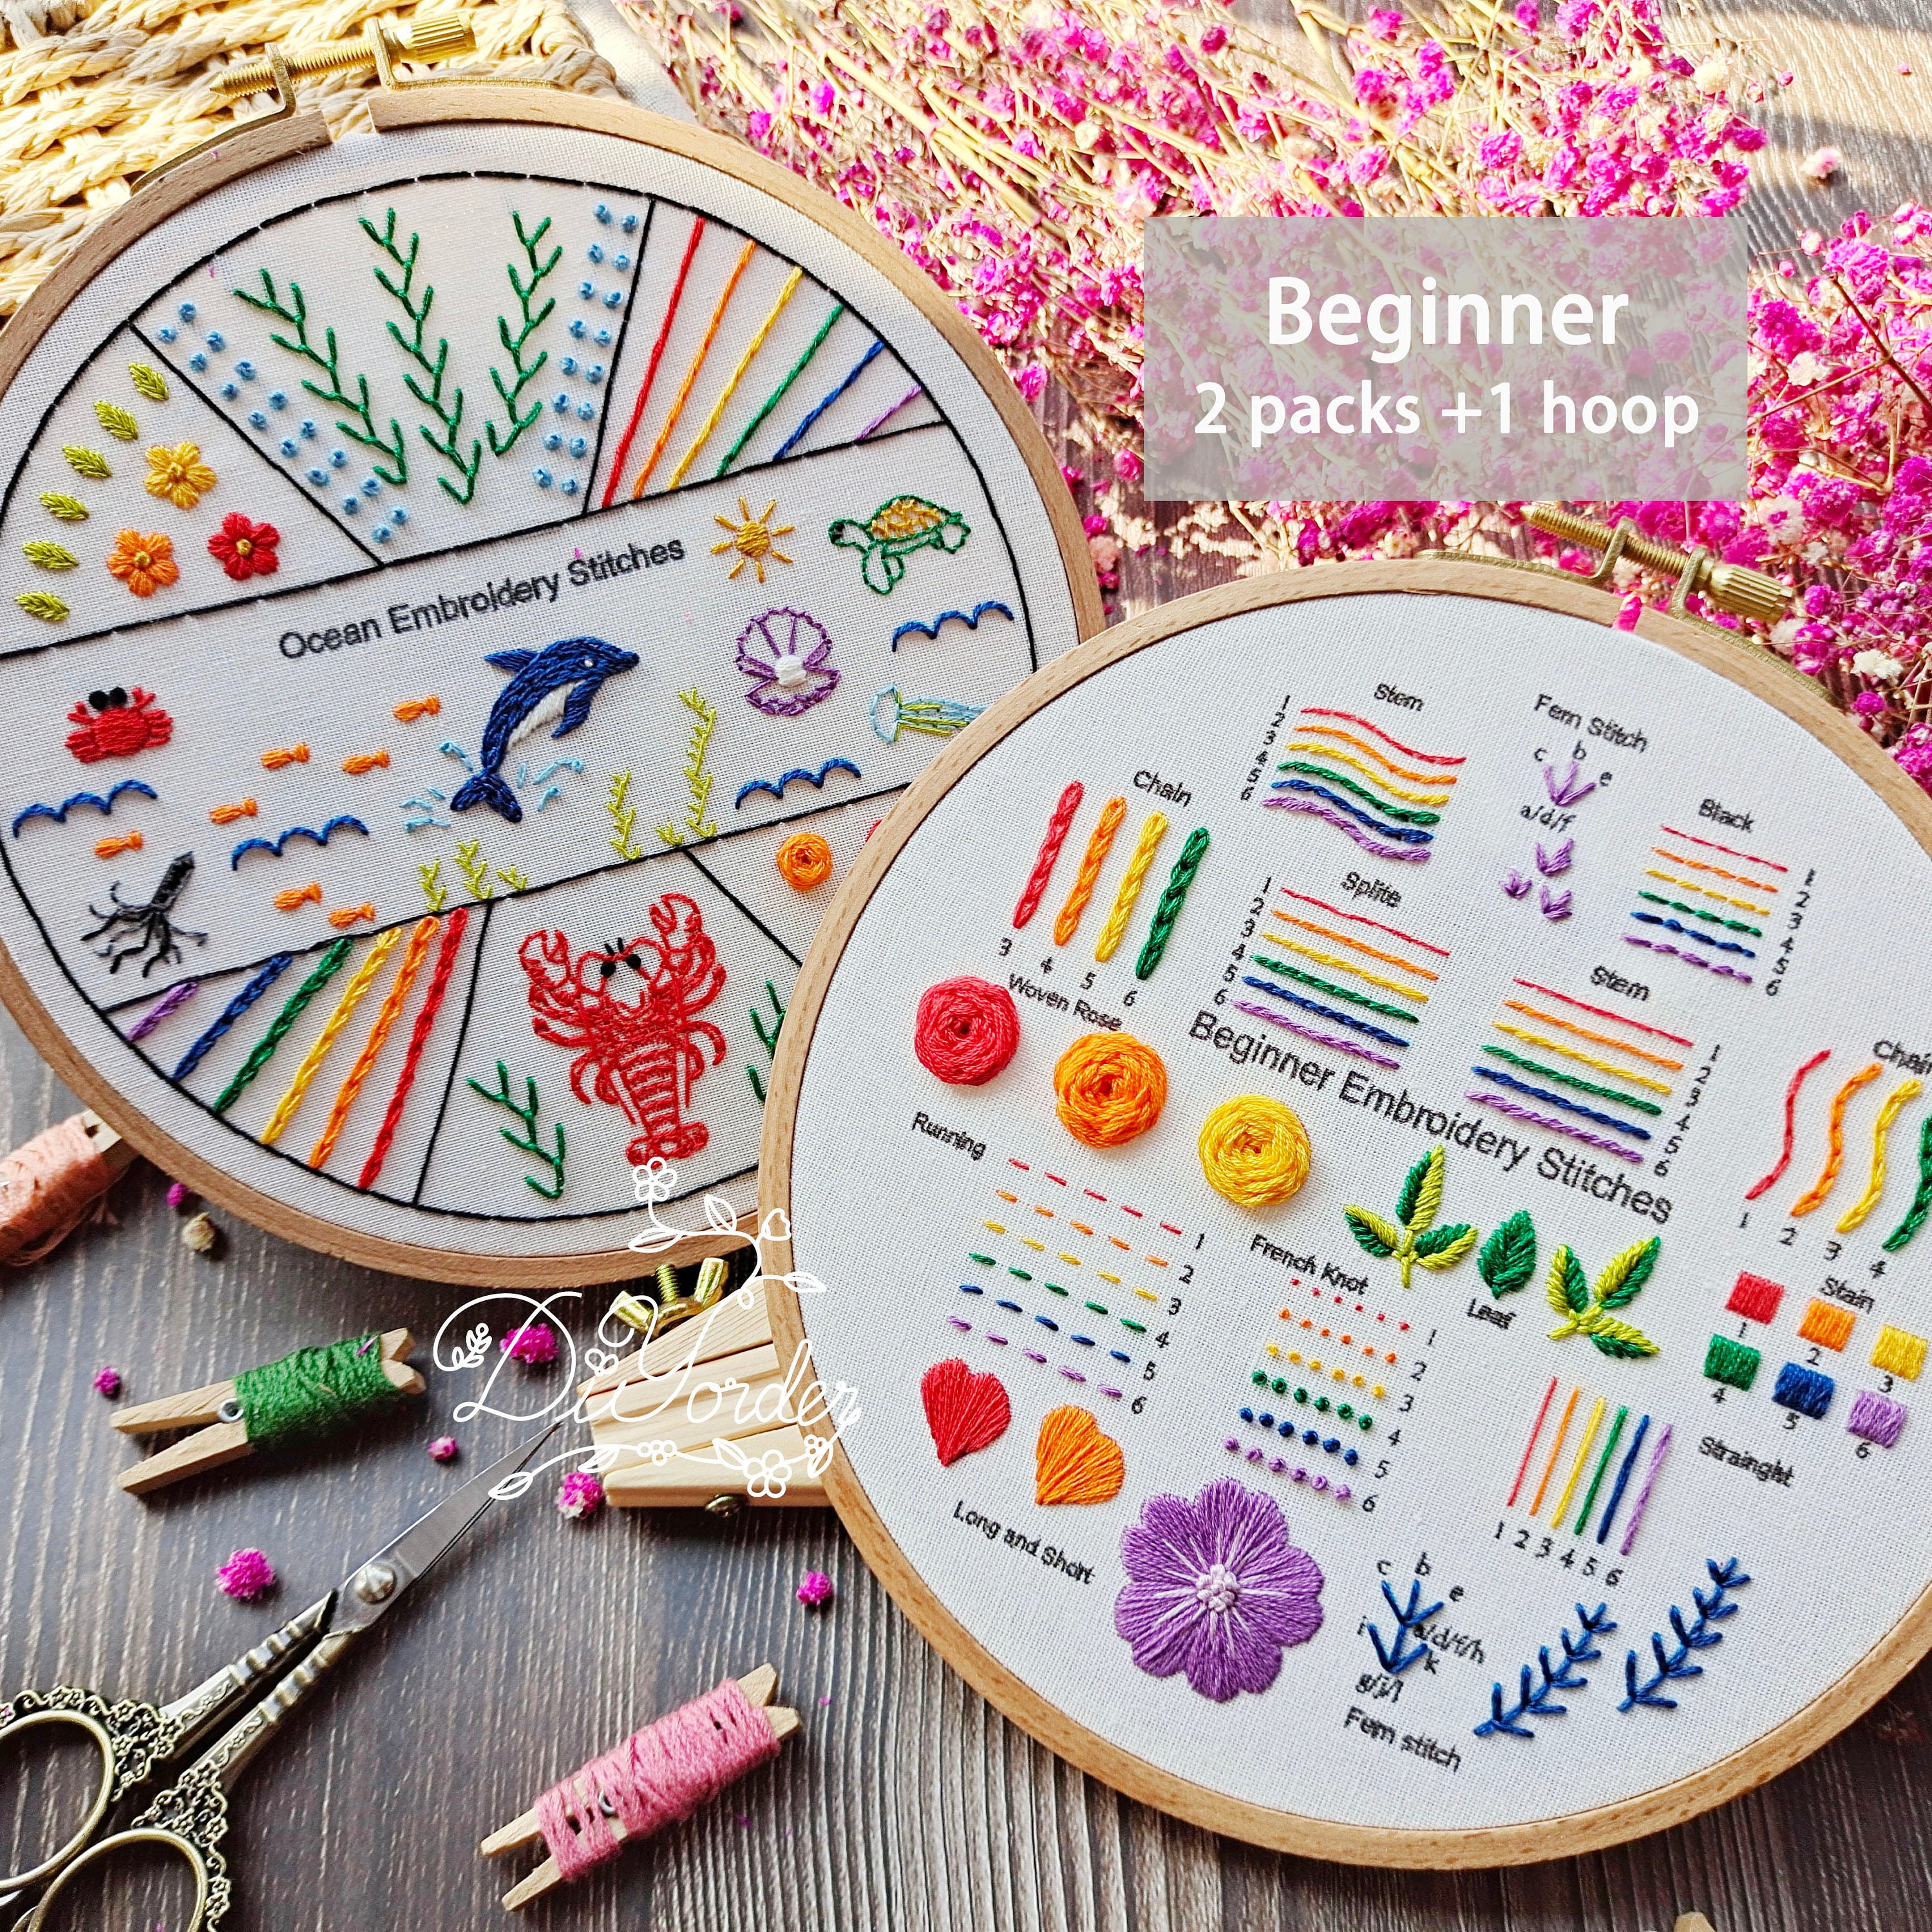 Rainbow Embroidery Kit, Stitch Sampler, Sewing Starter Kit Gift,  Mindfulness Activities 